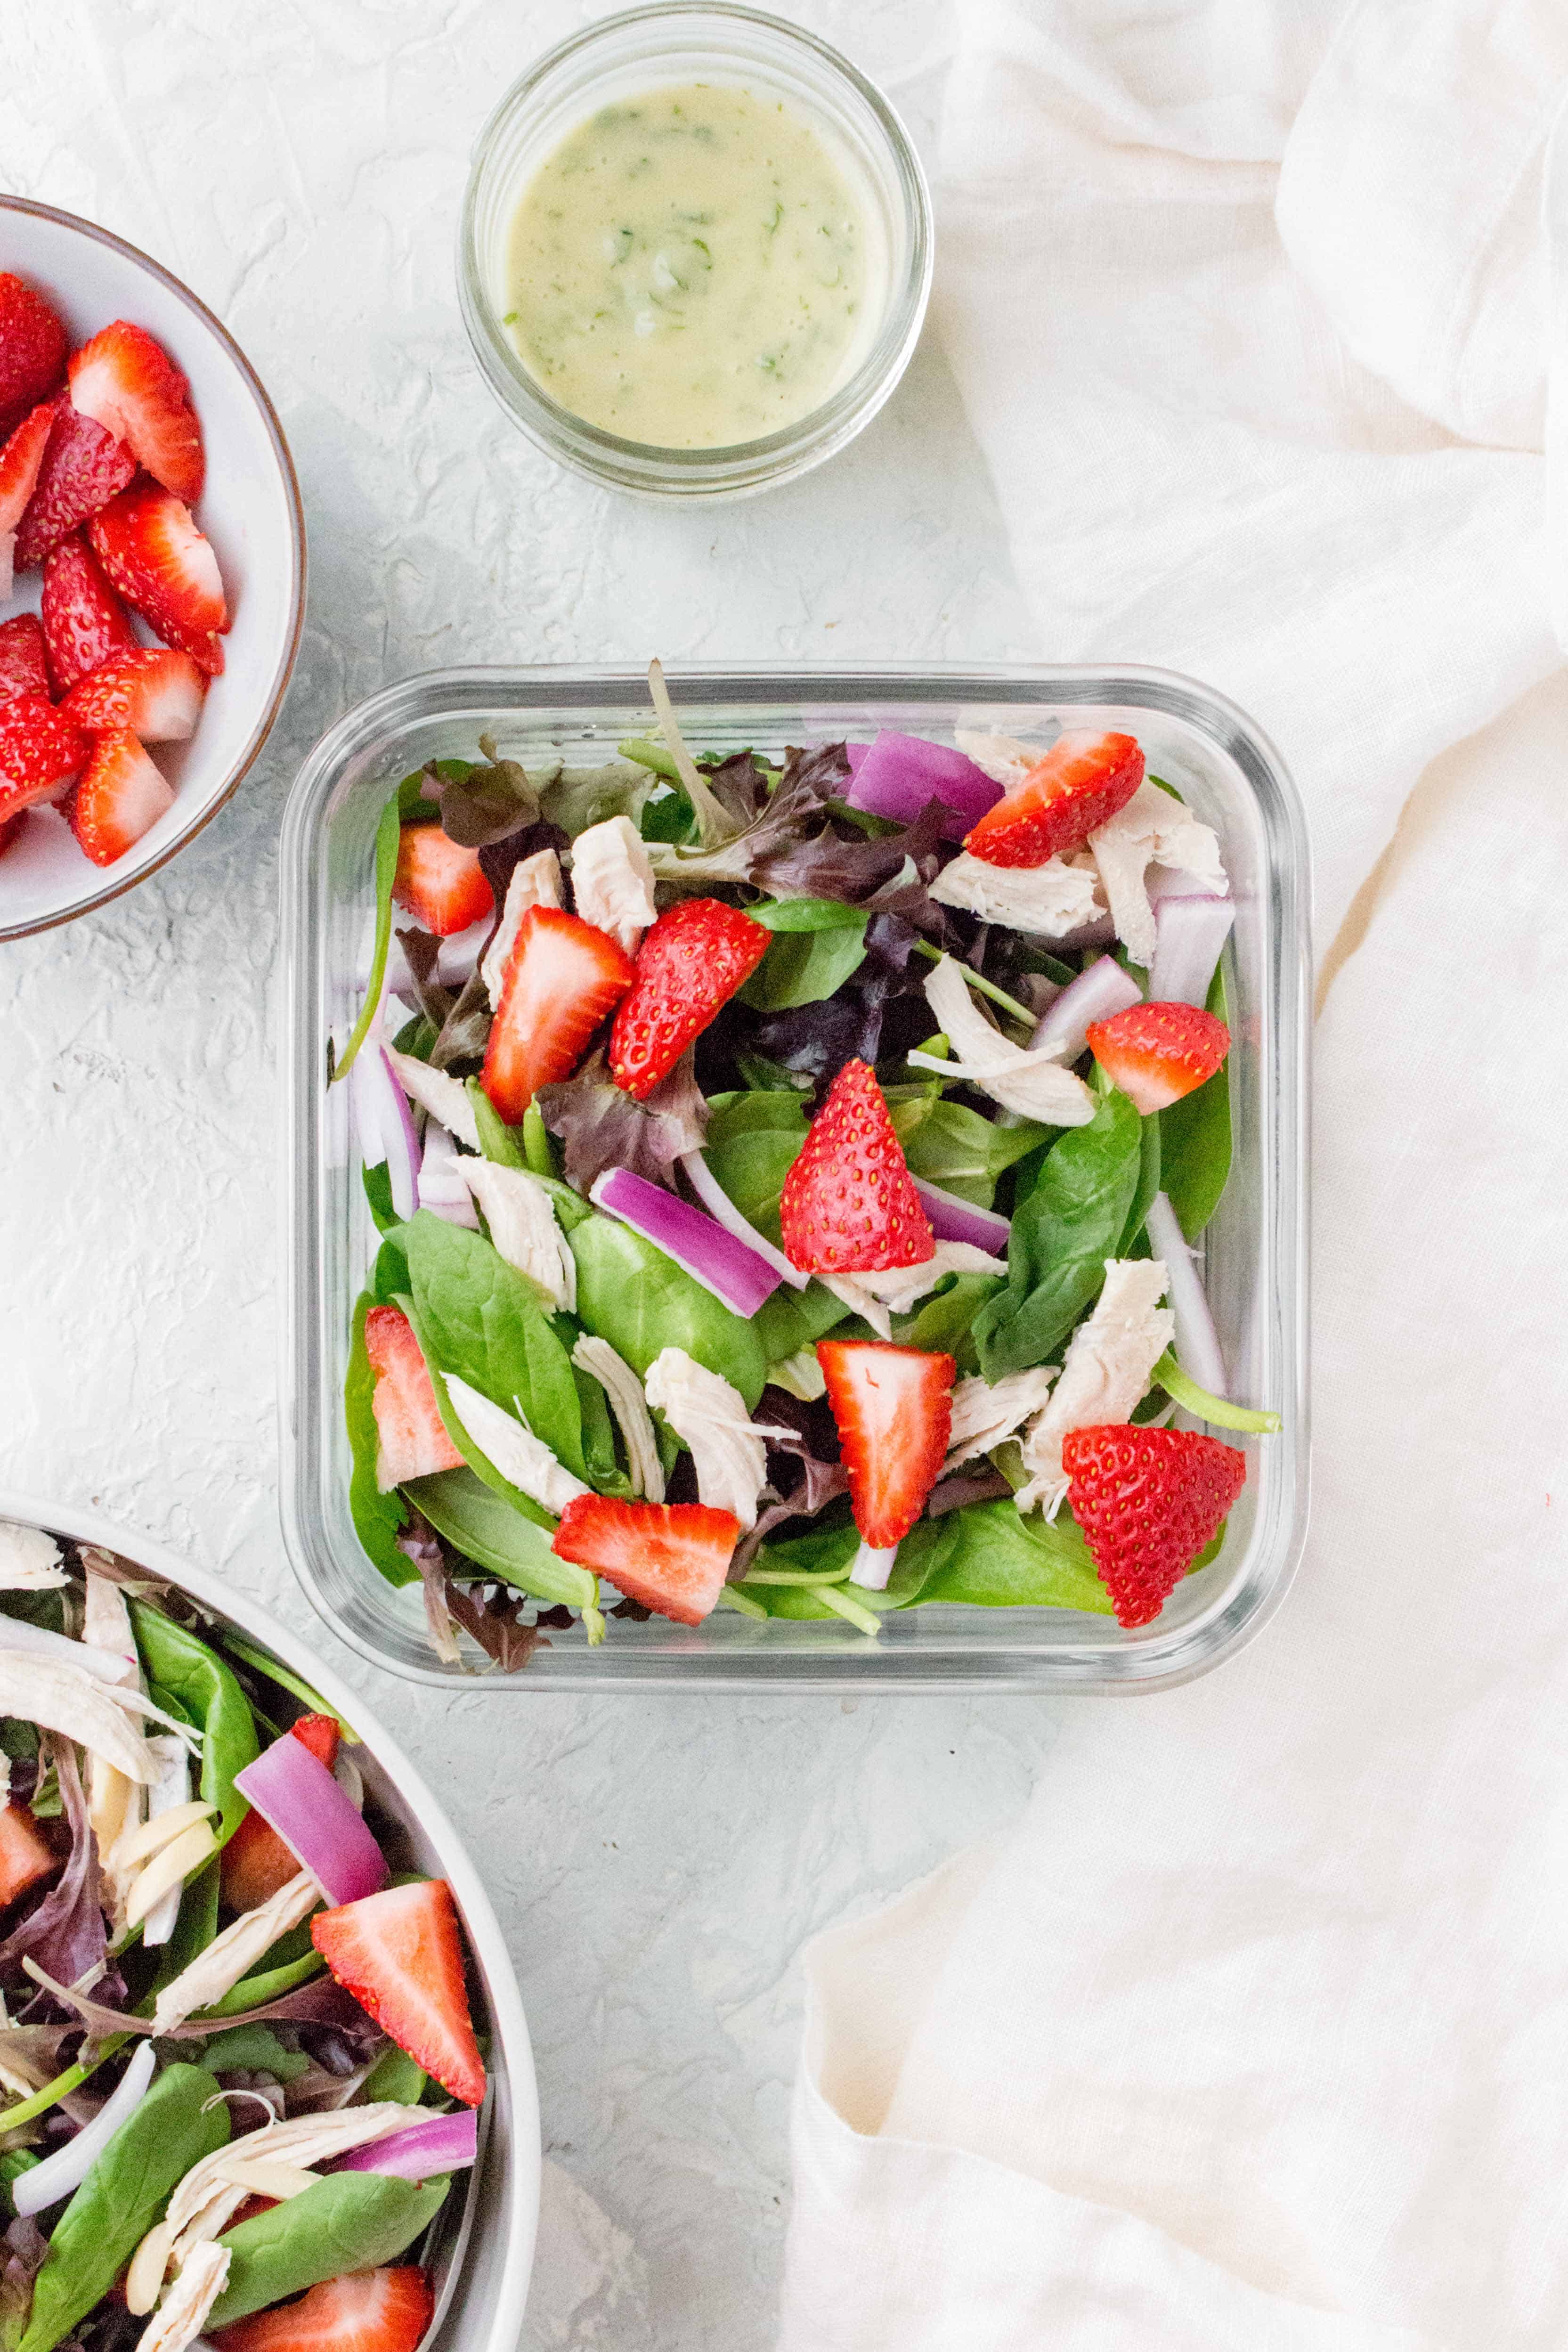 Refreshing and bright, this Chicken Strawberry Avocado Salad is a not-boring salad that works as the perfect cold lunch idea, light dinner, or as a potluck dish! 